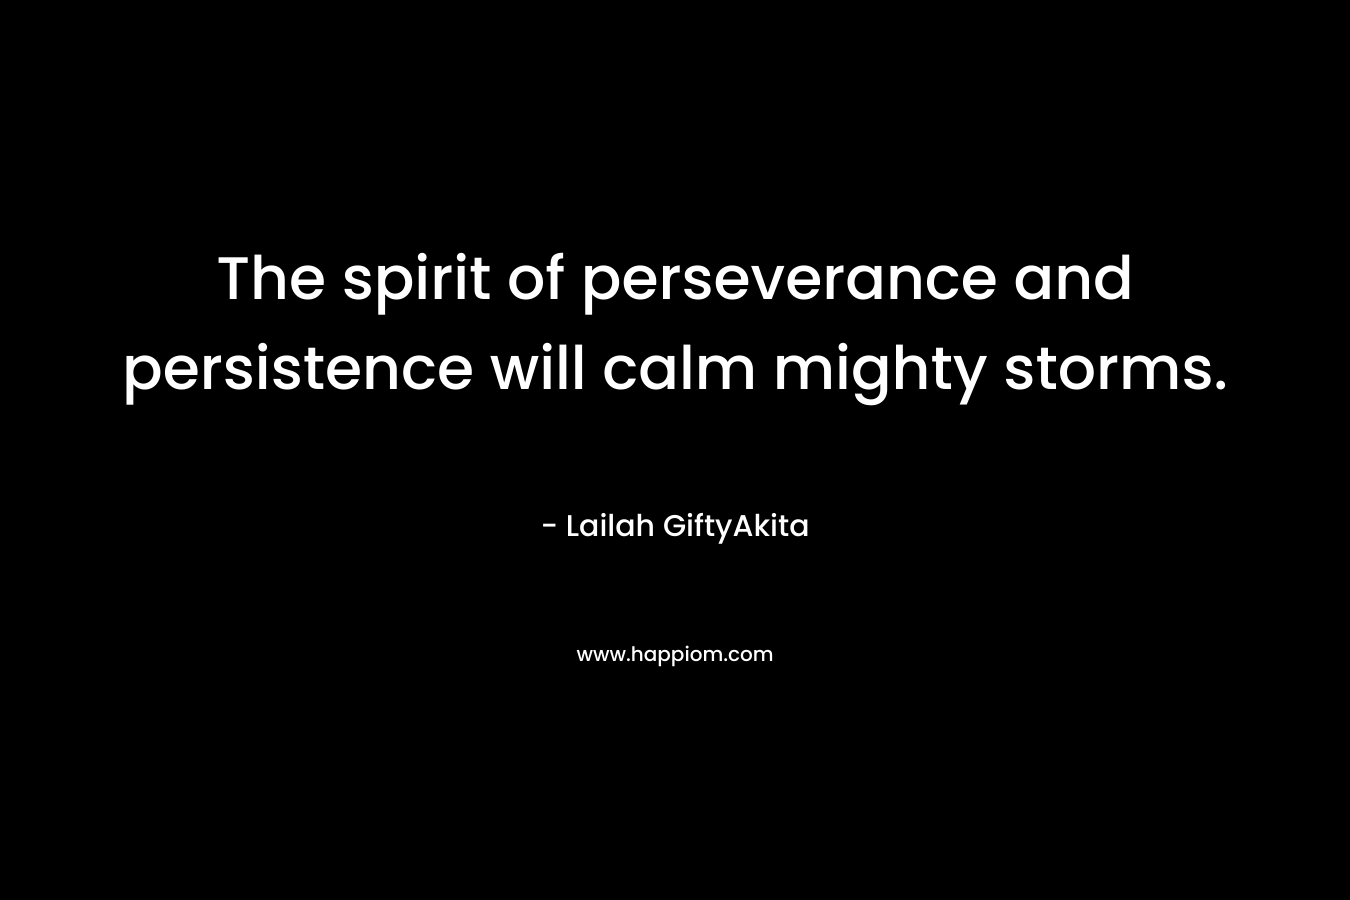 The spirit of perseverance and persistence will calm mighty storms. – Lailah GiftyAkita